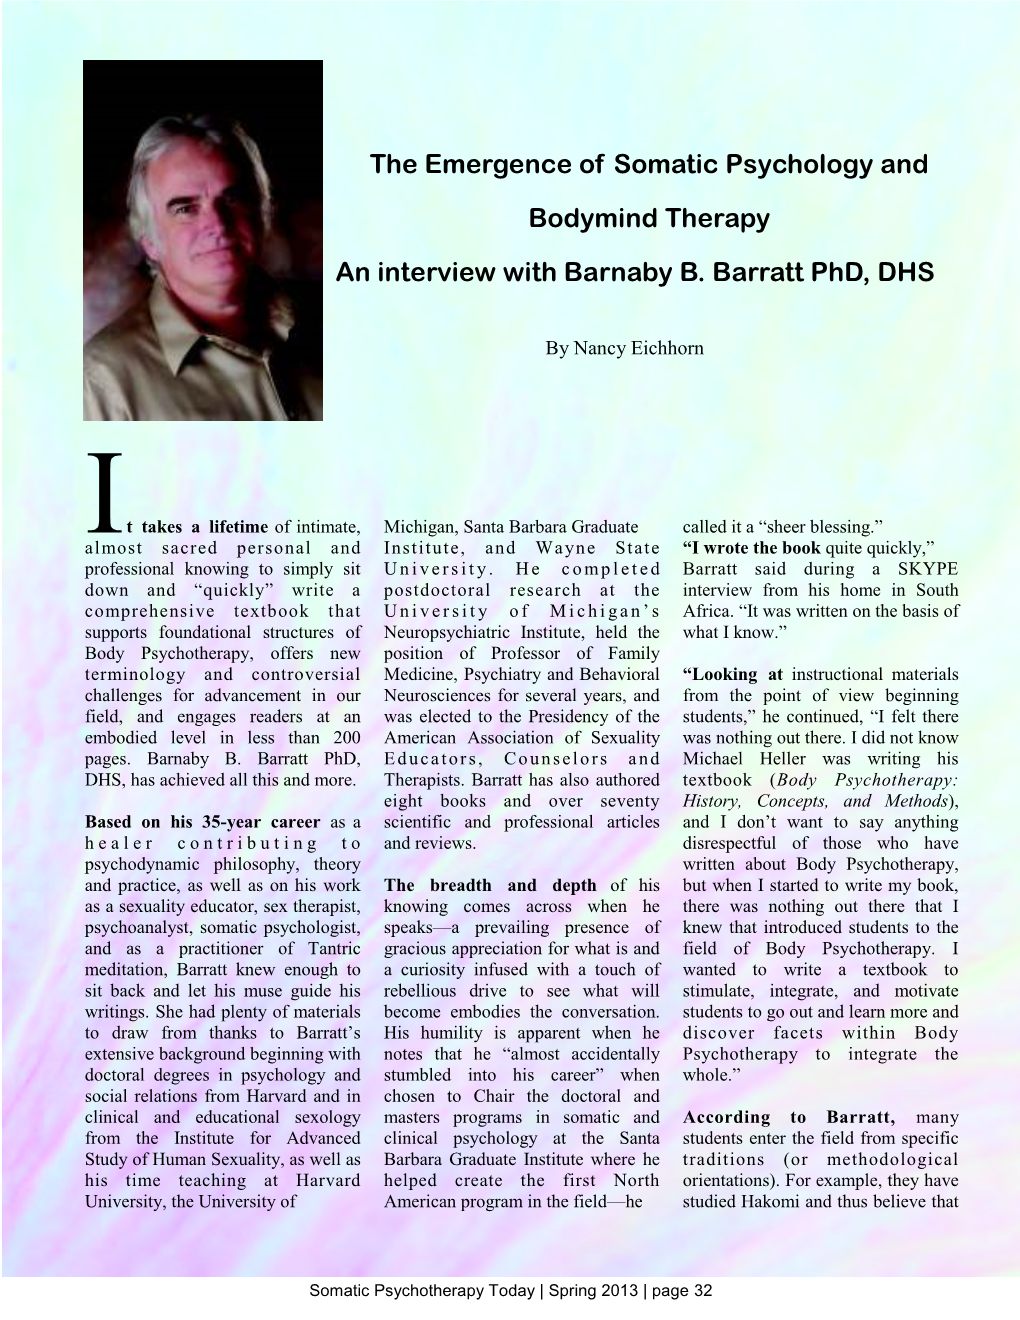 The Emergence of Somatic Psychology and Bodymind Therapy an Interview with Barnaby B. Barratt Phd